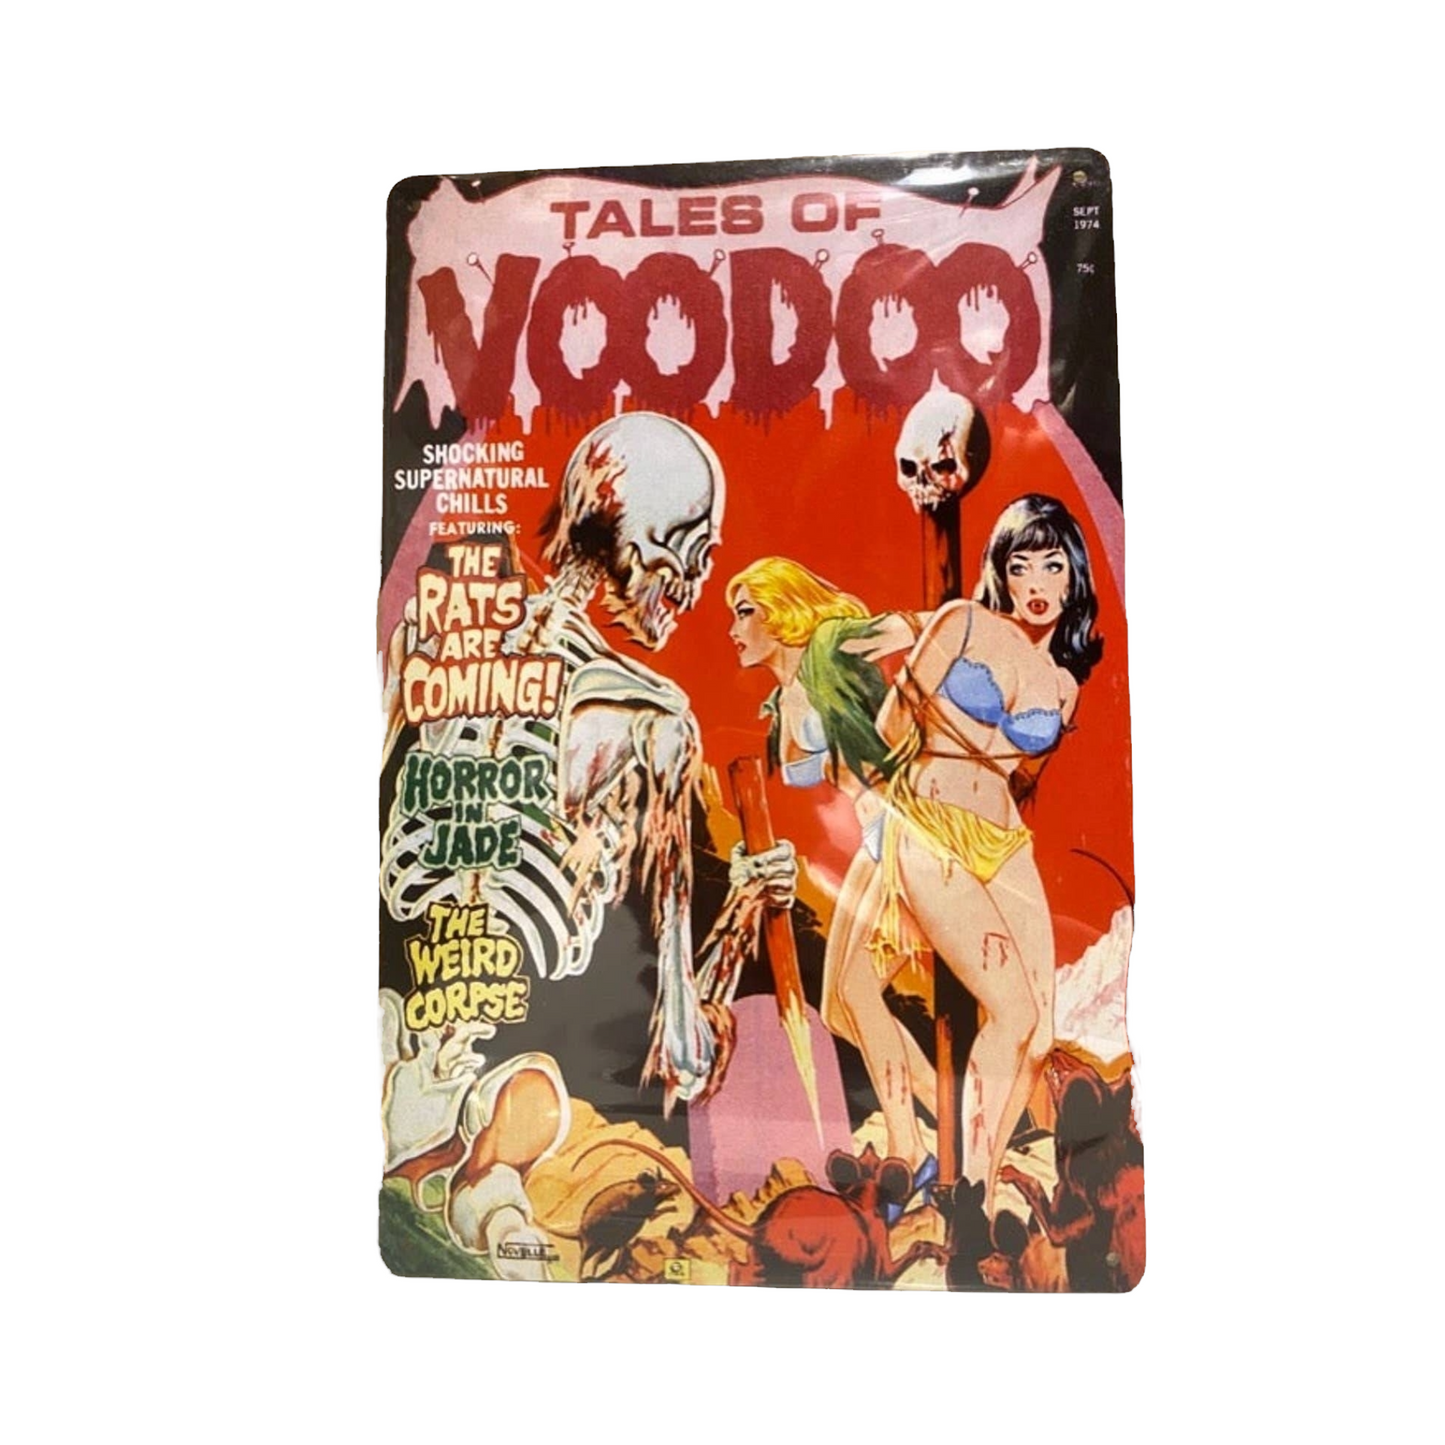 Tales Of Voodoo Sept 1974 Comic Cover Metal Tin Sign 8"x12"